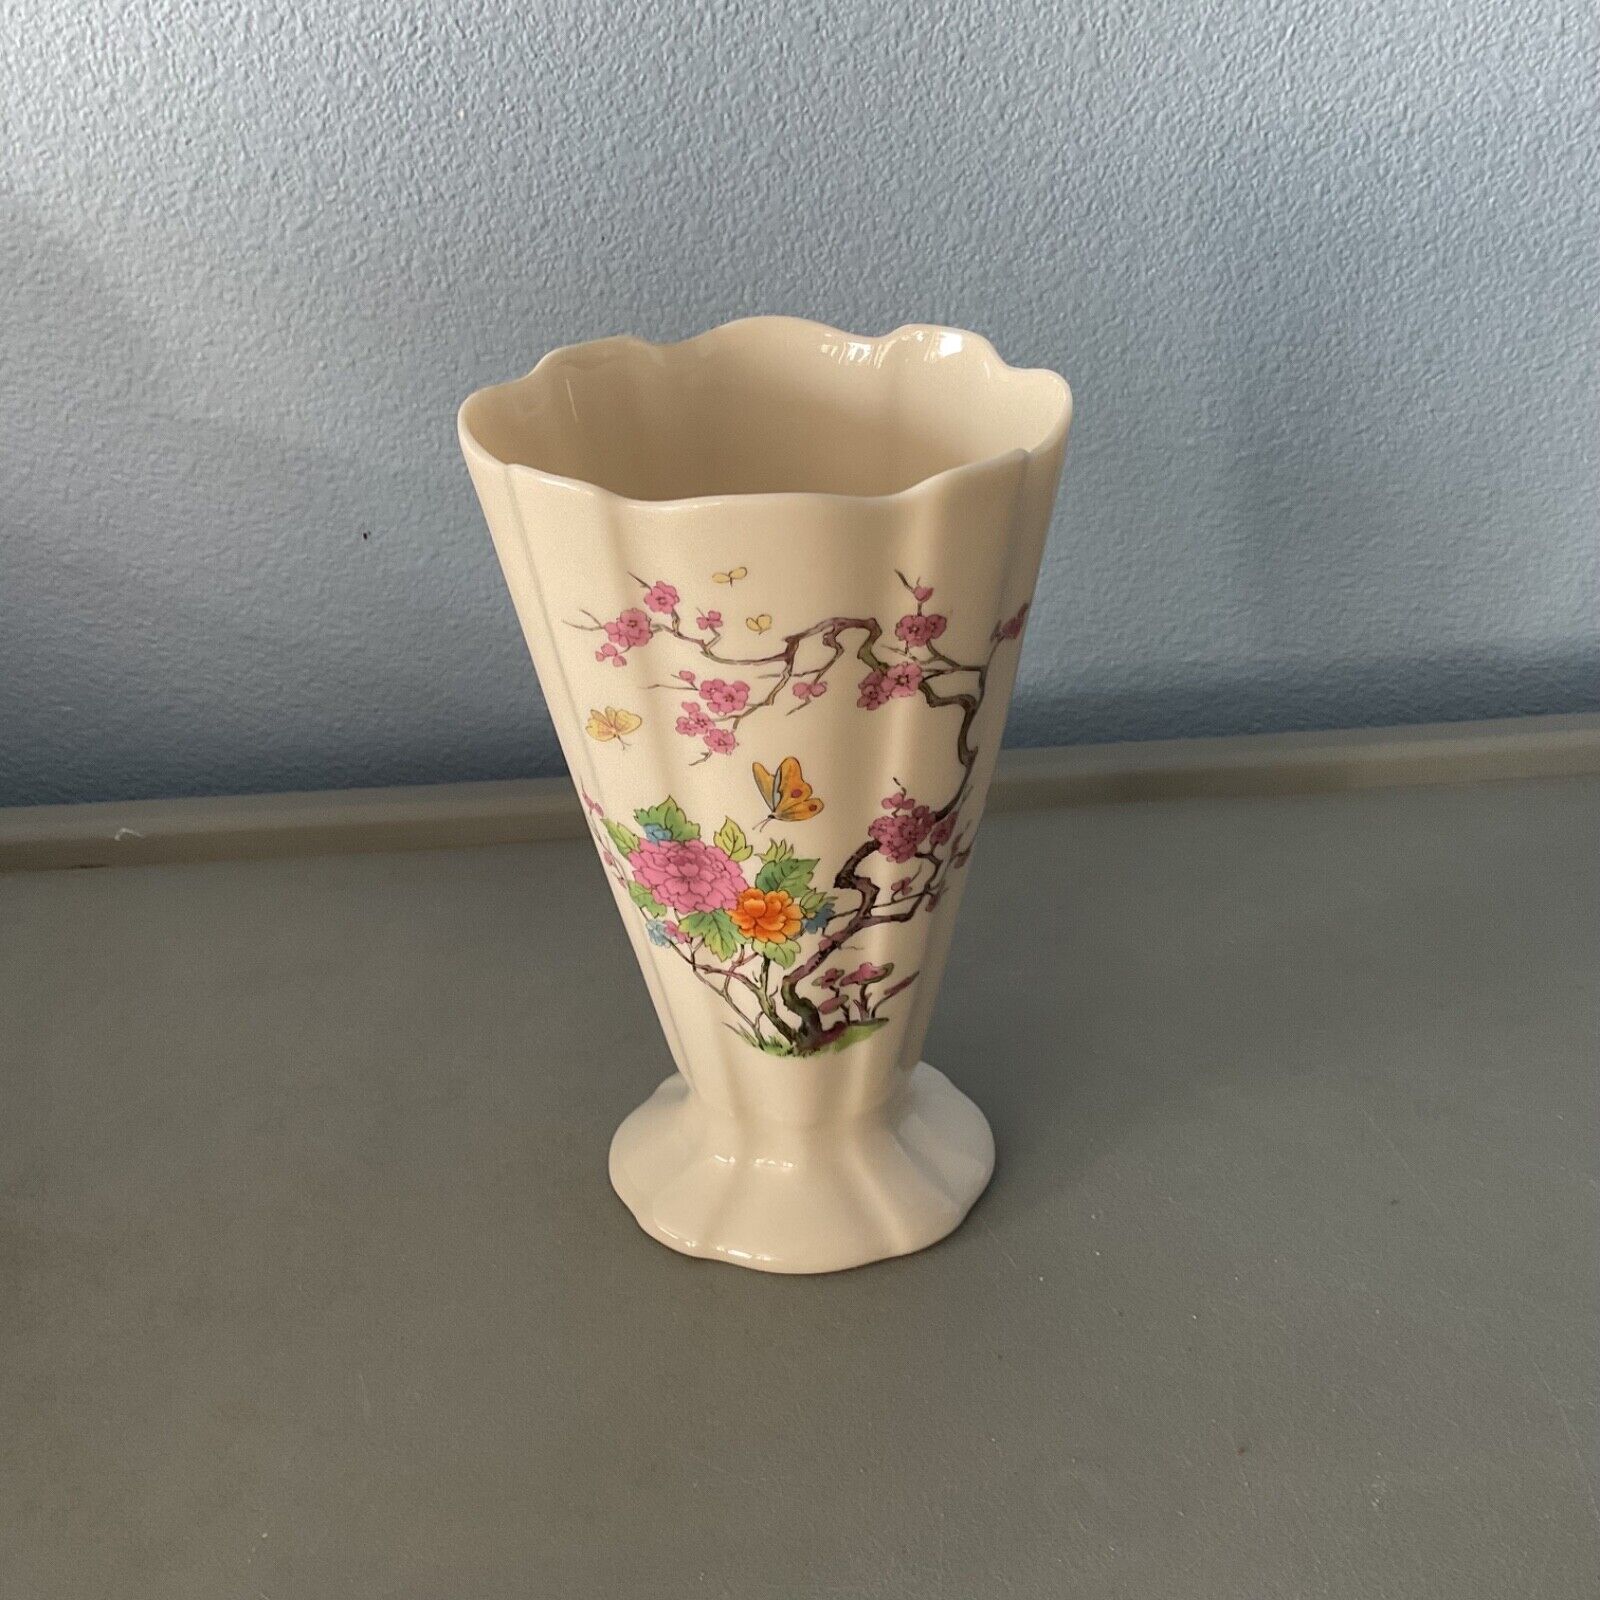 RARE MING LENOX VASE WITH BUTTERFLY